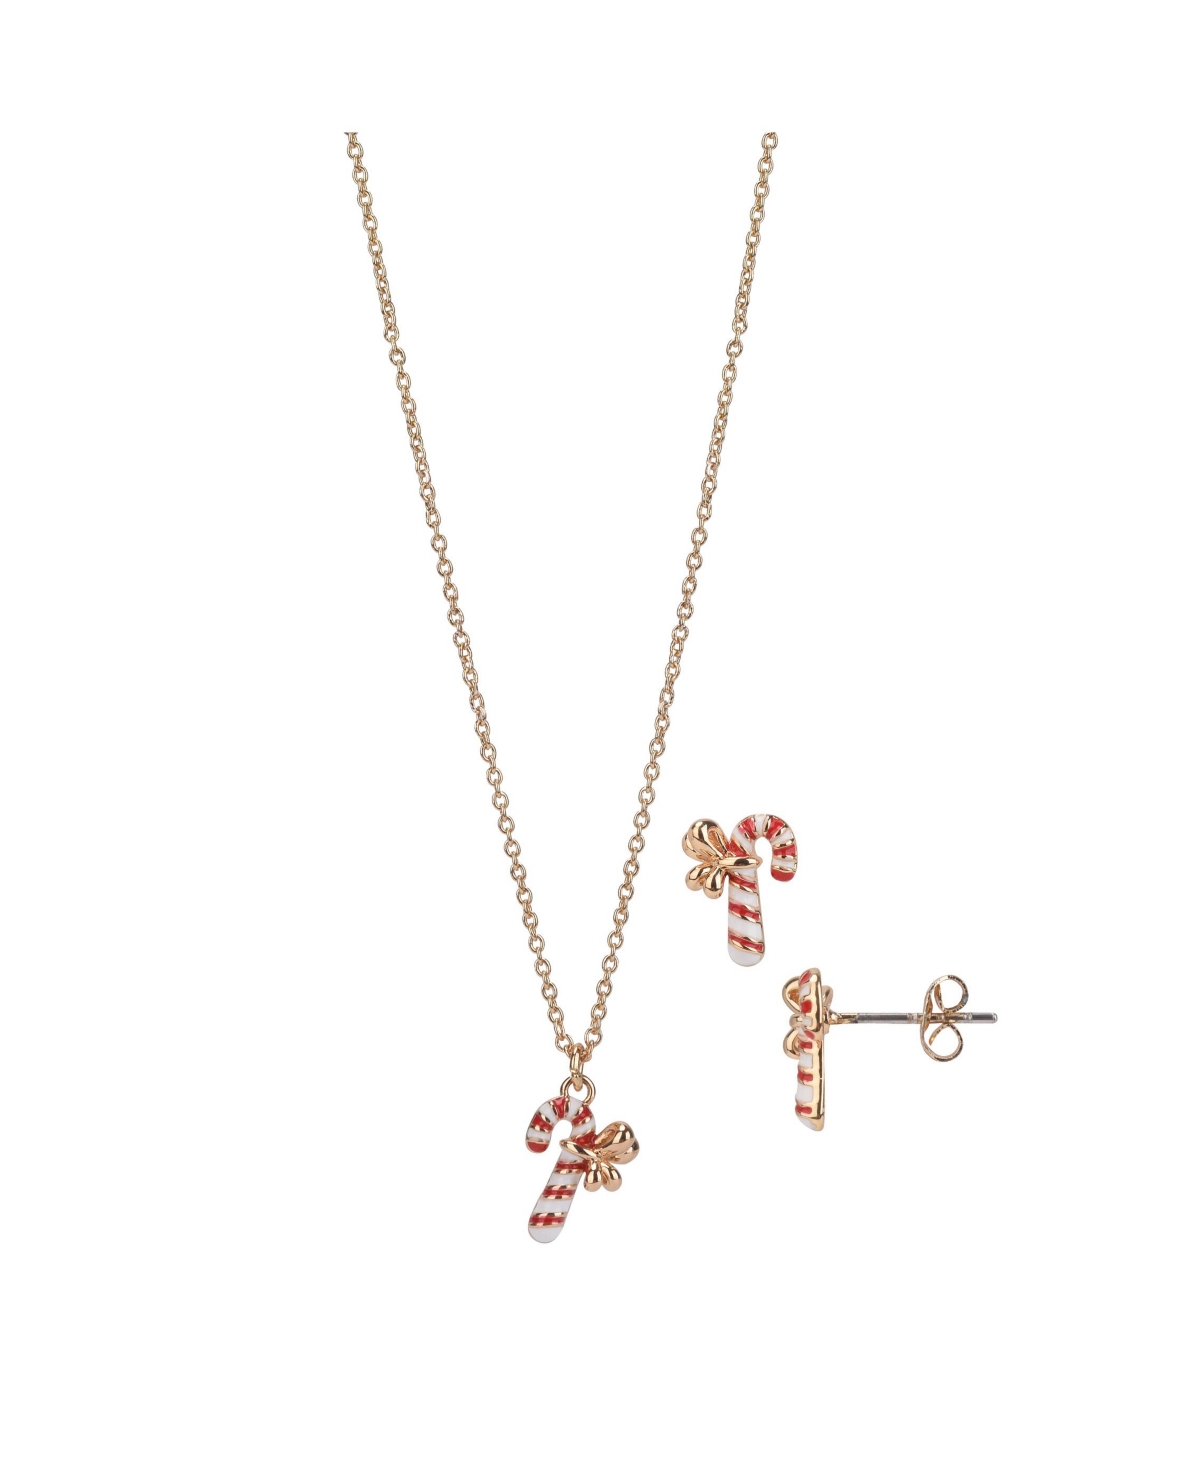 Fao Schwarz Candy Cane Necklace And Earring Set, 3 Pieces In Gold